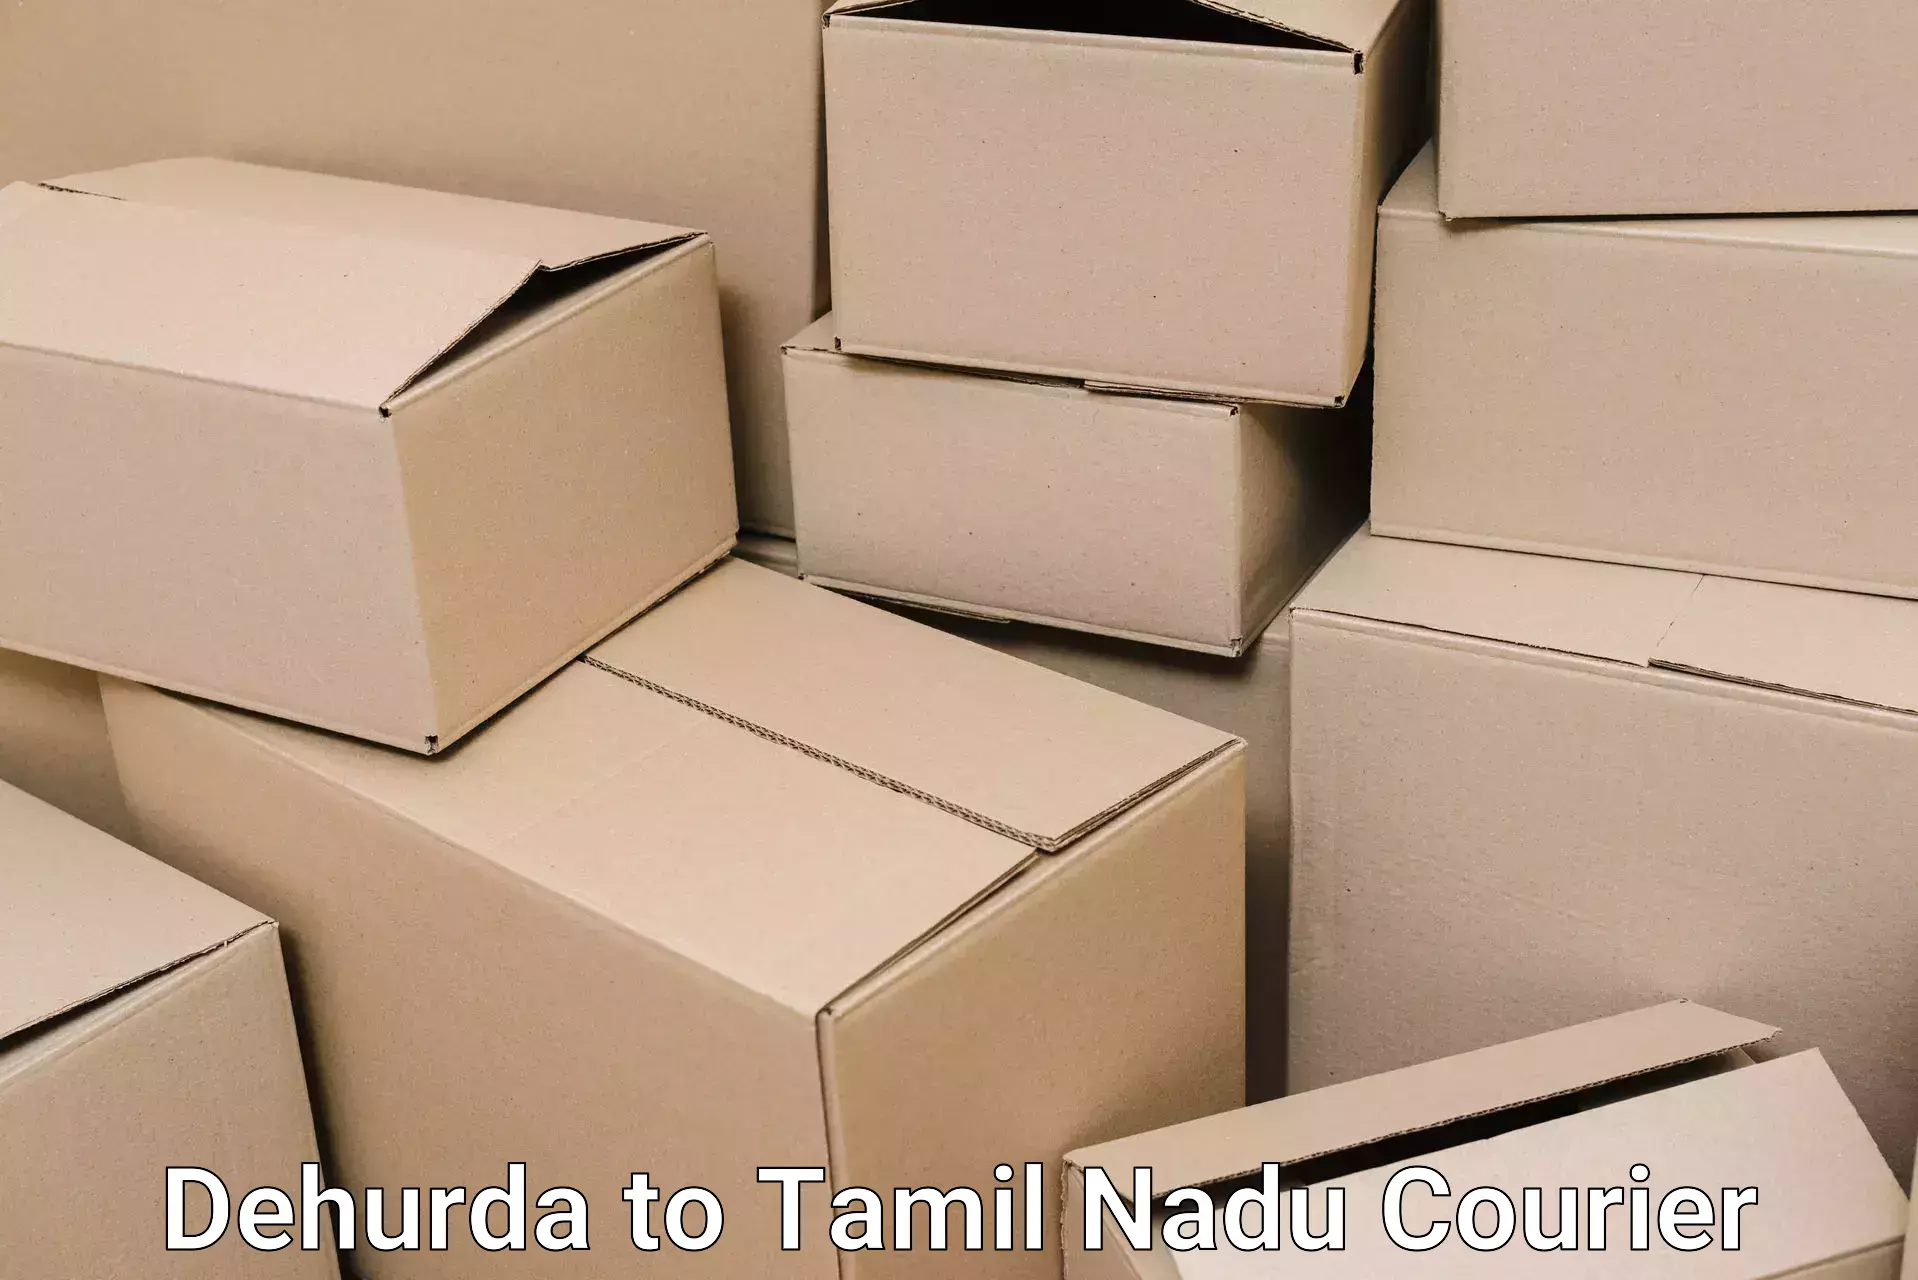 Furniture transport service Dehurda to Shanmugha Arts Science Technology and Research Academy Thanjavur